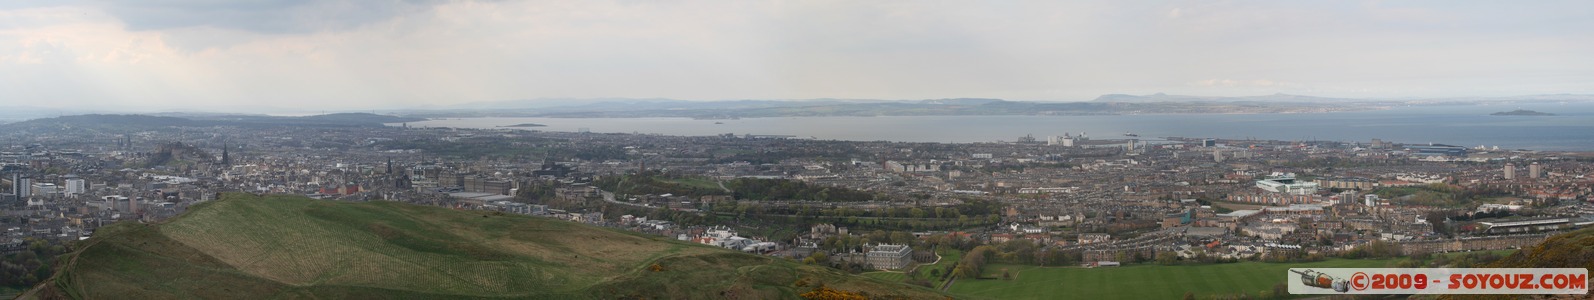 Panorama of Edinburgh from Arthur's Seat
Queen's Dr, Edinburgh, City of Edinburgh EH8 8, UK
Mots-clés: Parc panorama 360 view